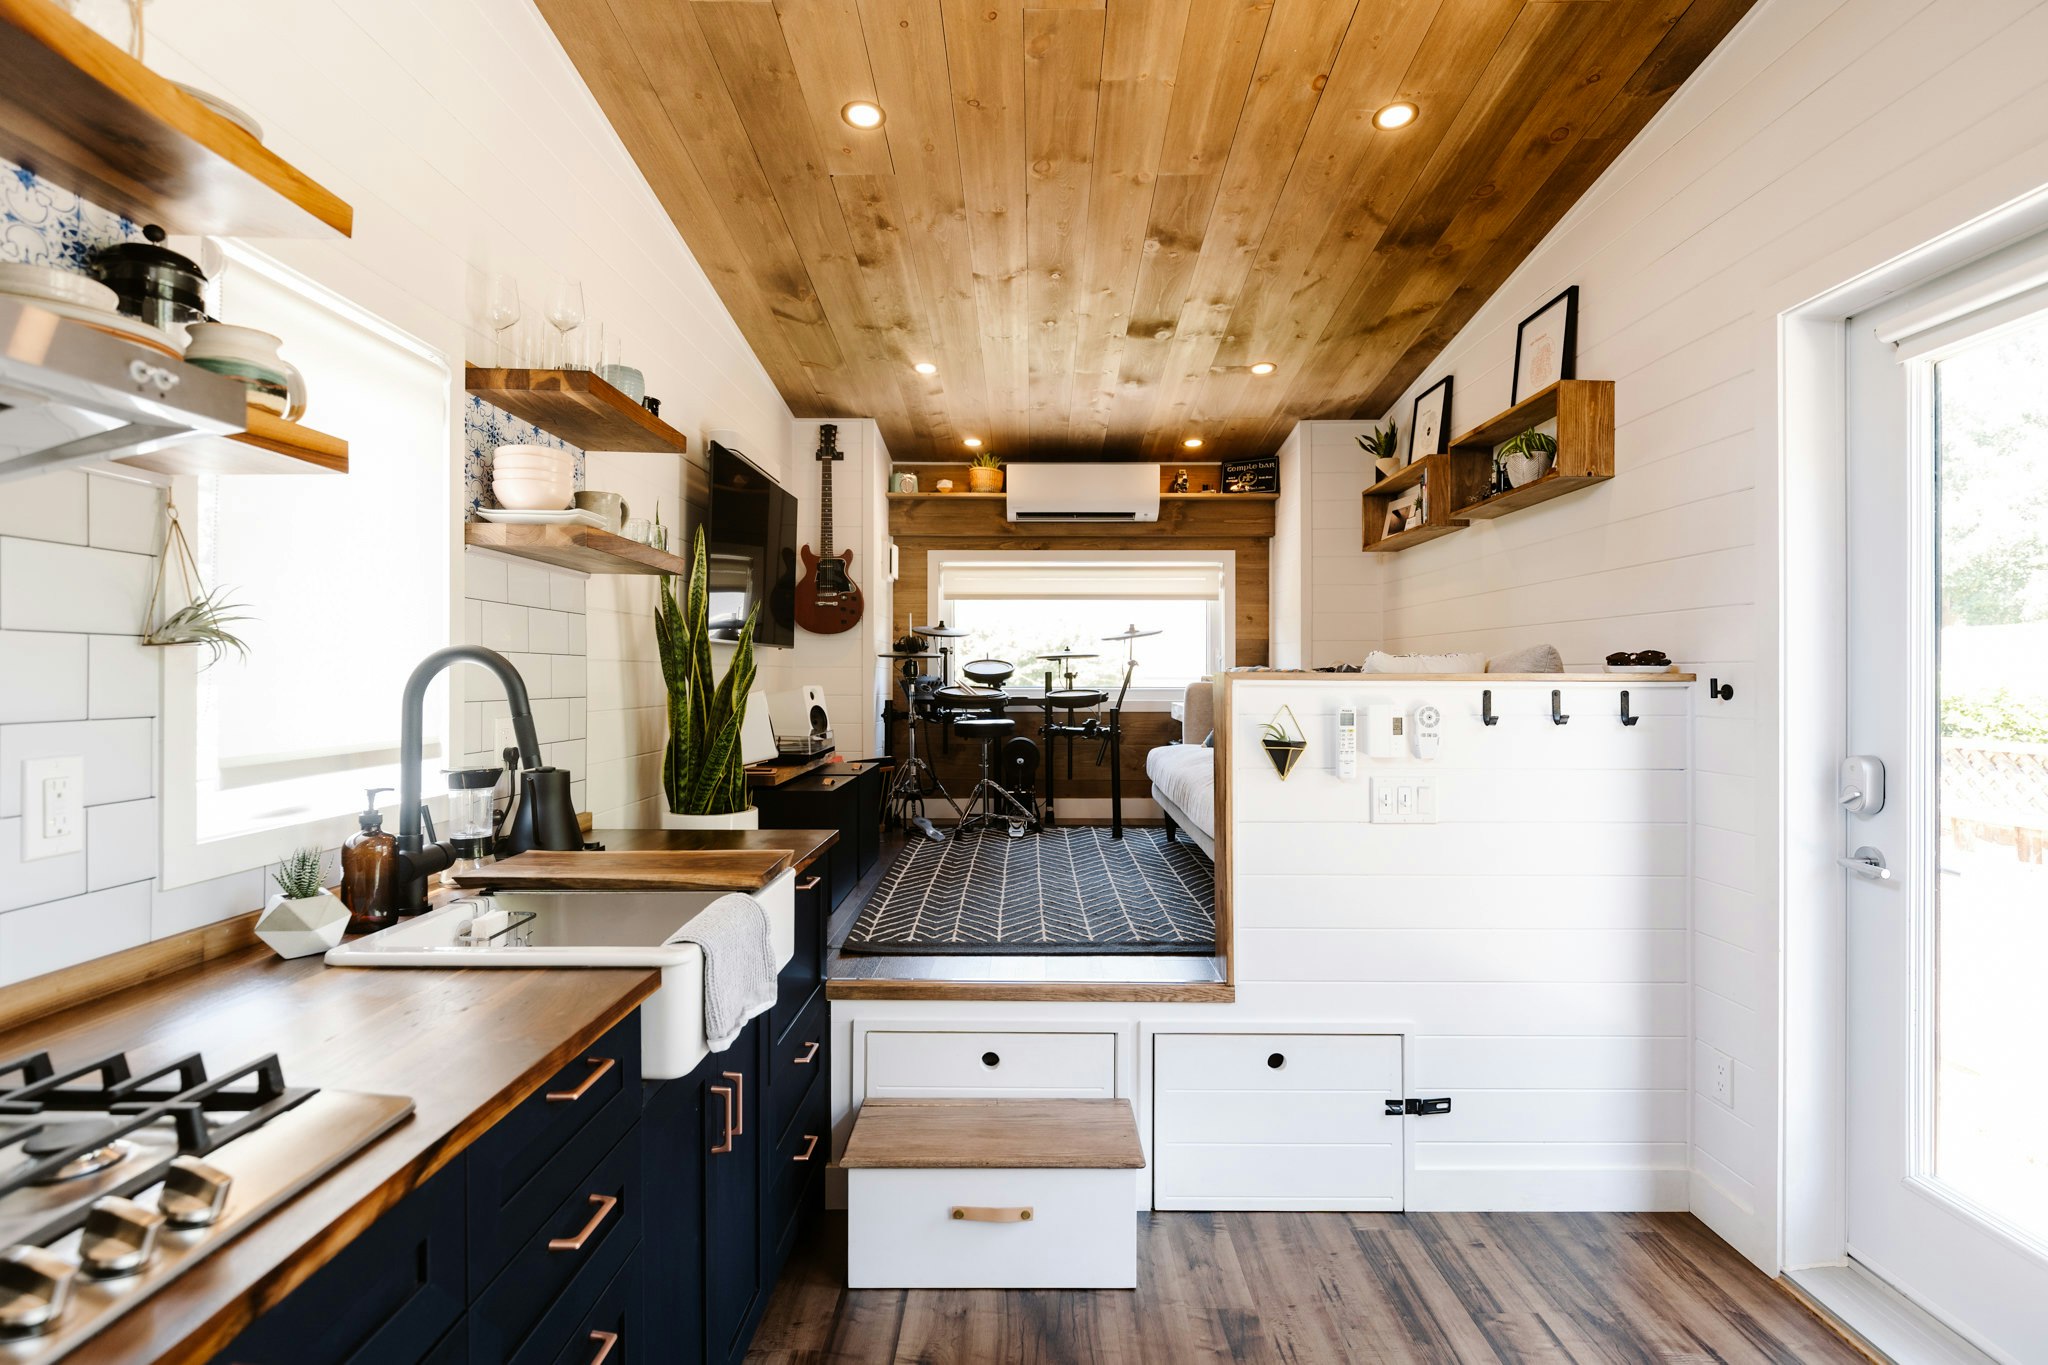 Tiny Homes Are a Social Media Hit. But Do We Want to Live in Them